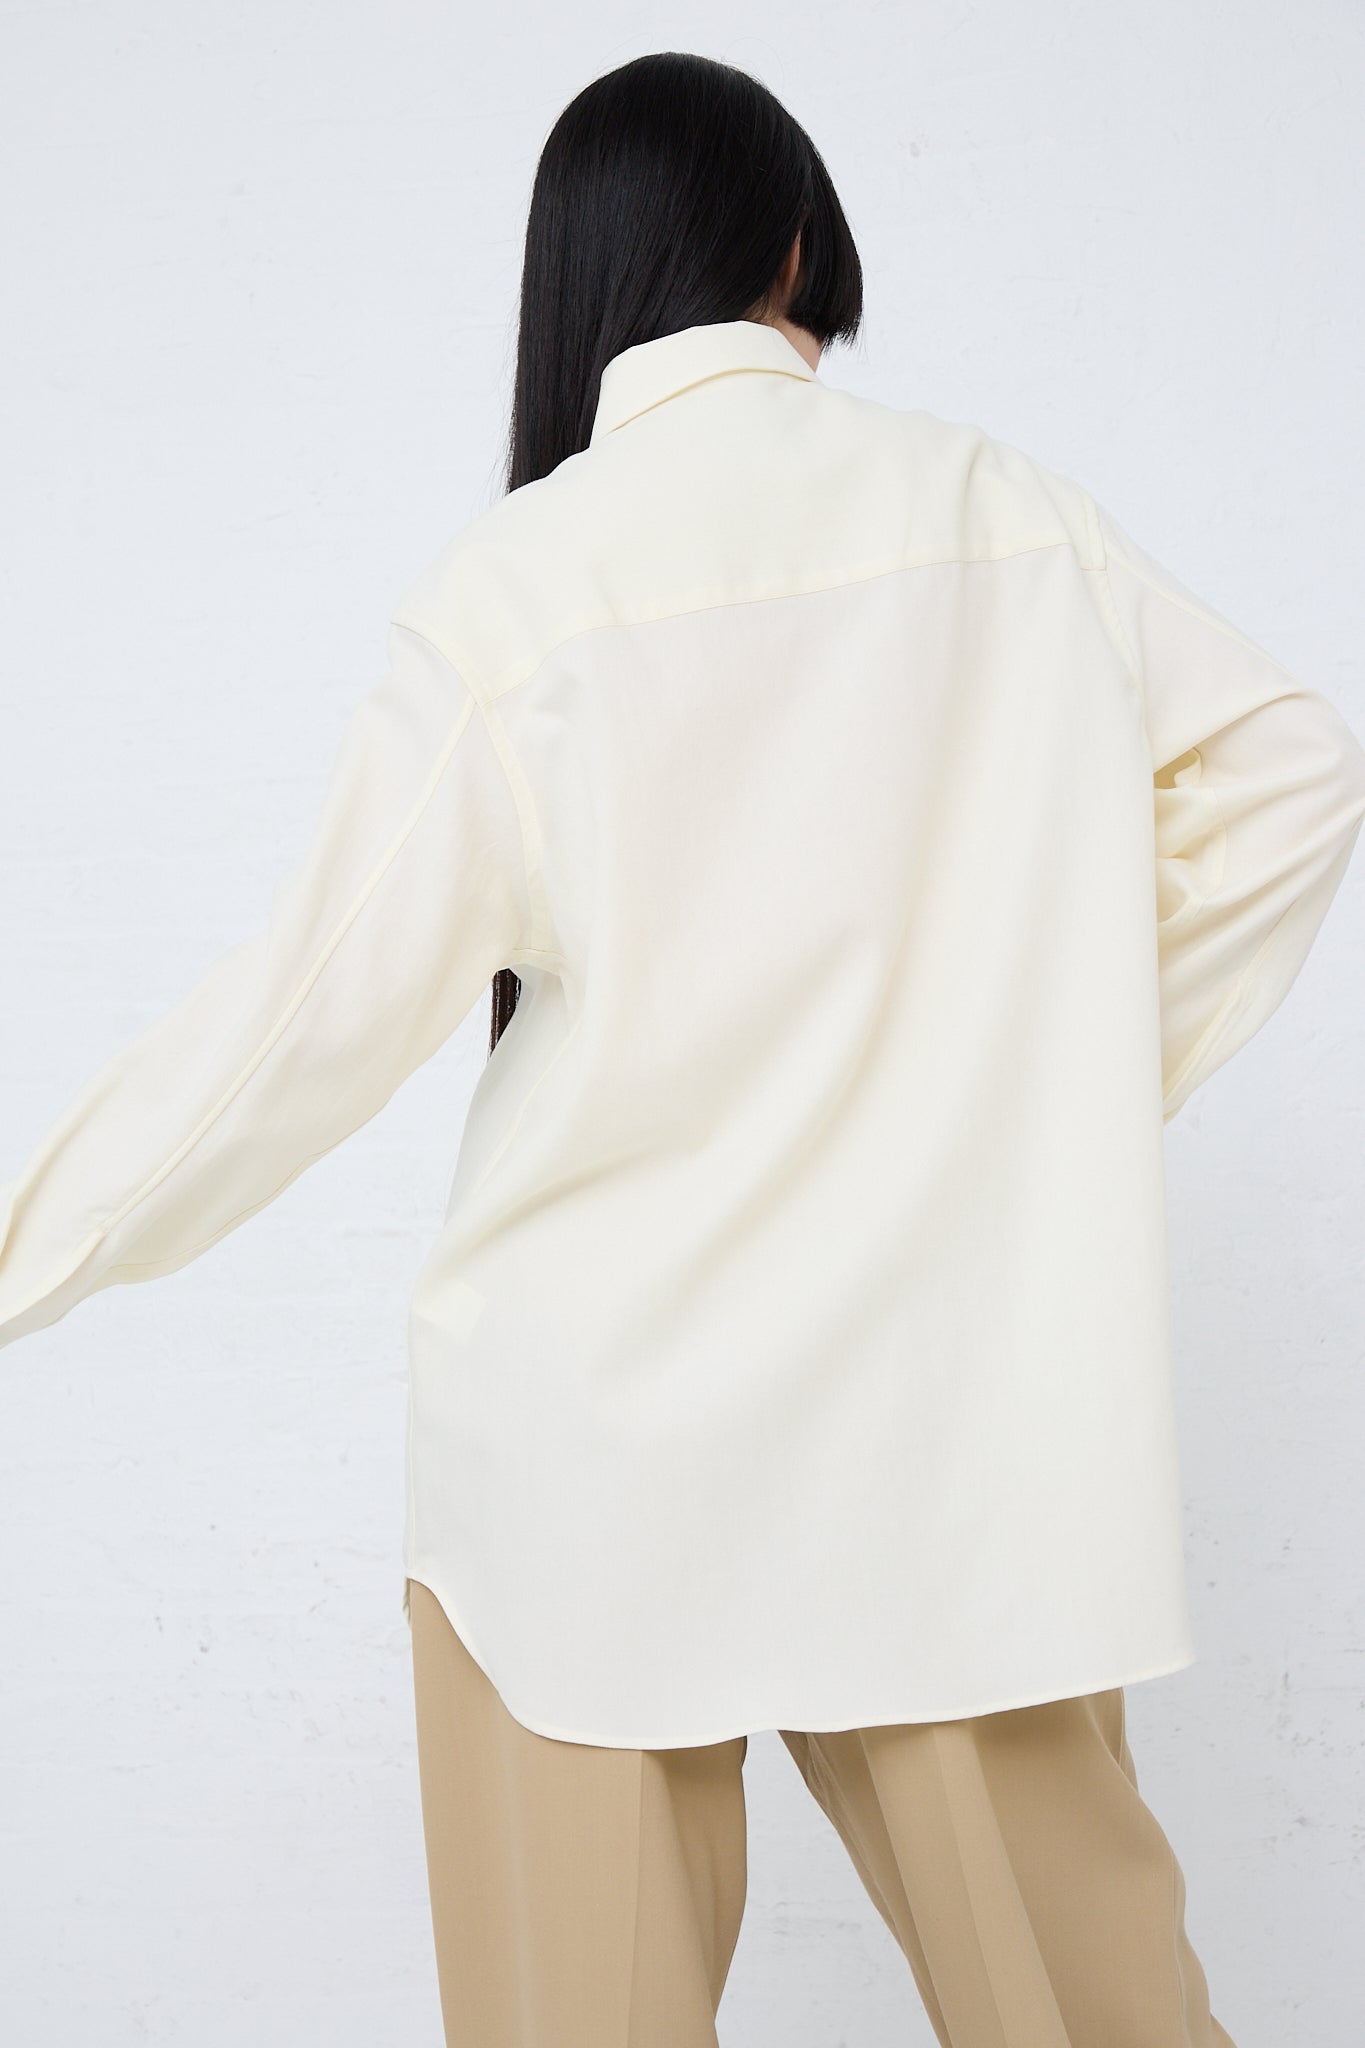 The back of a woman wearing a long sleeve Santos Overshirt in Parchment by Studio Nicholson.